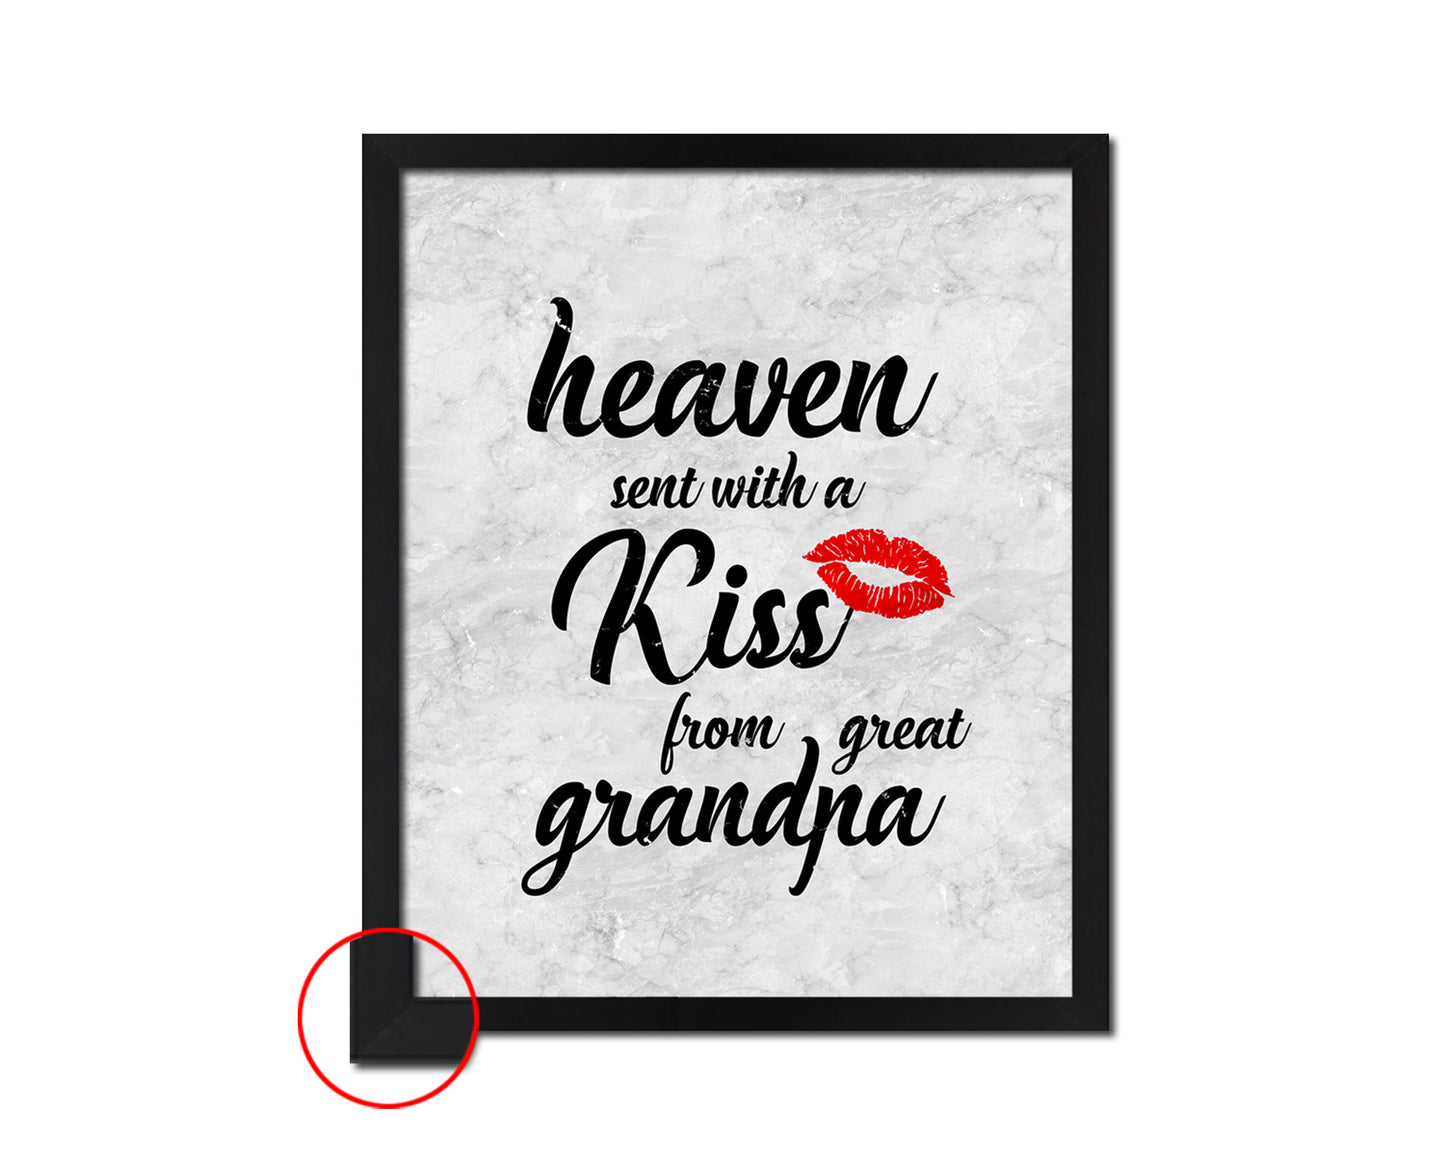 Heaven sent with a kiss from great grandpa Nursery Quote Framed Print Wall Art Decor Gifts